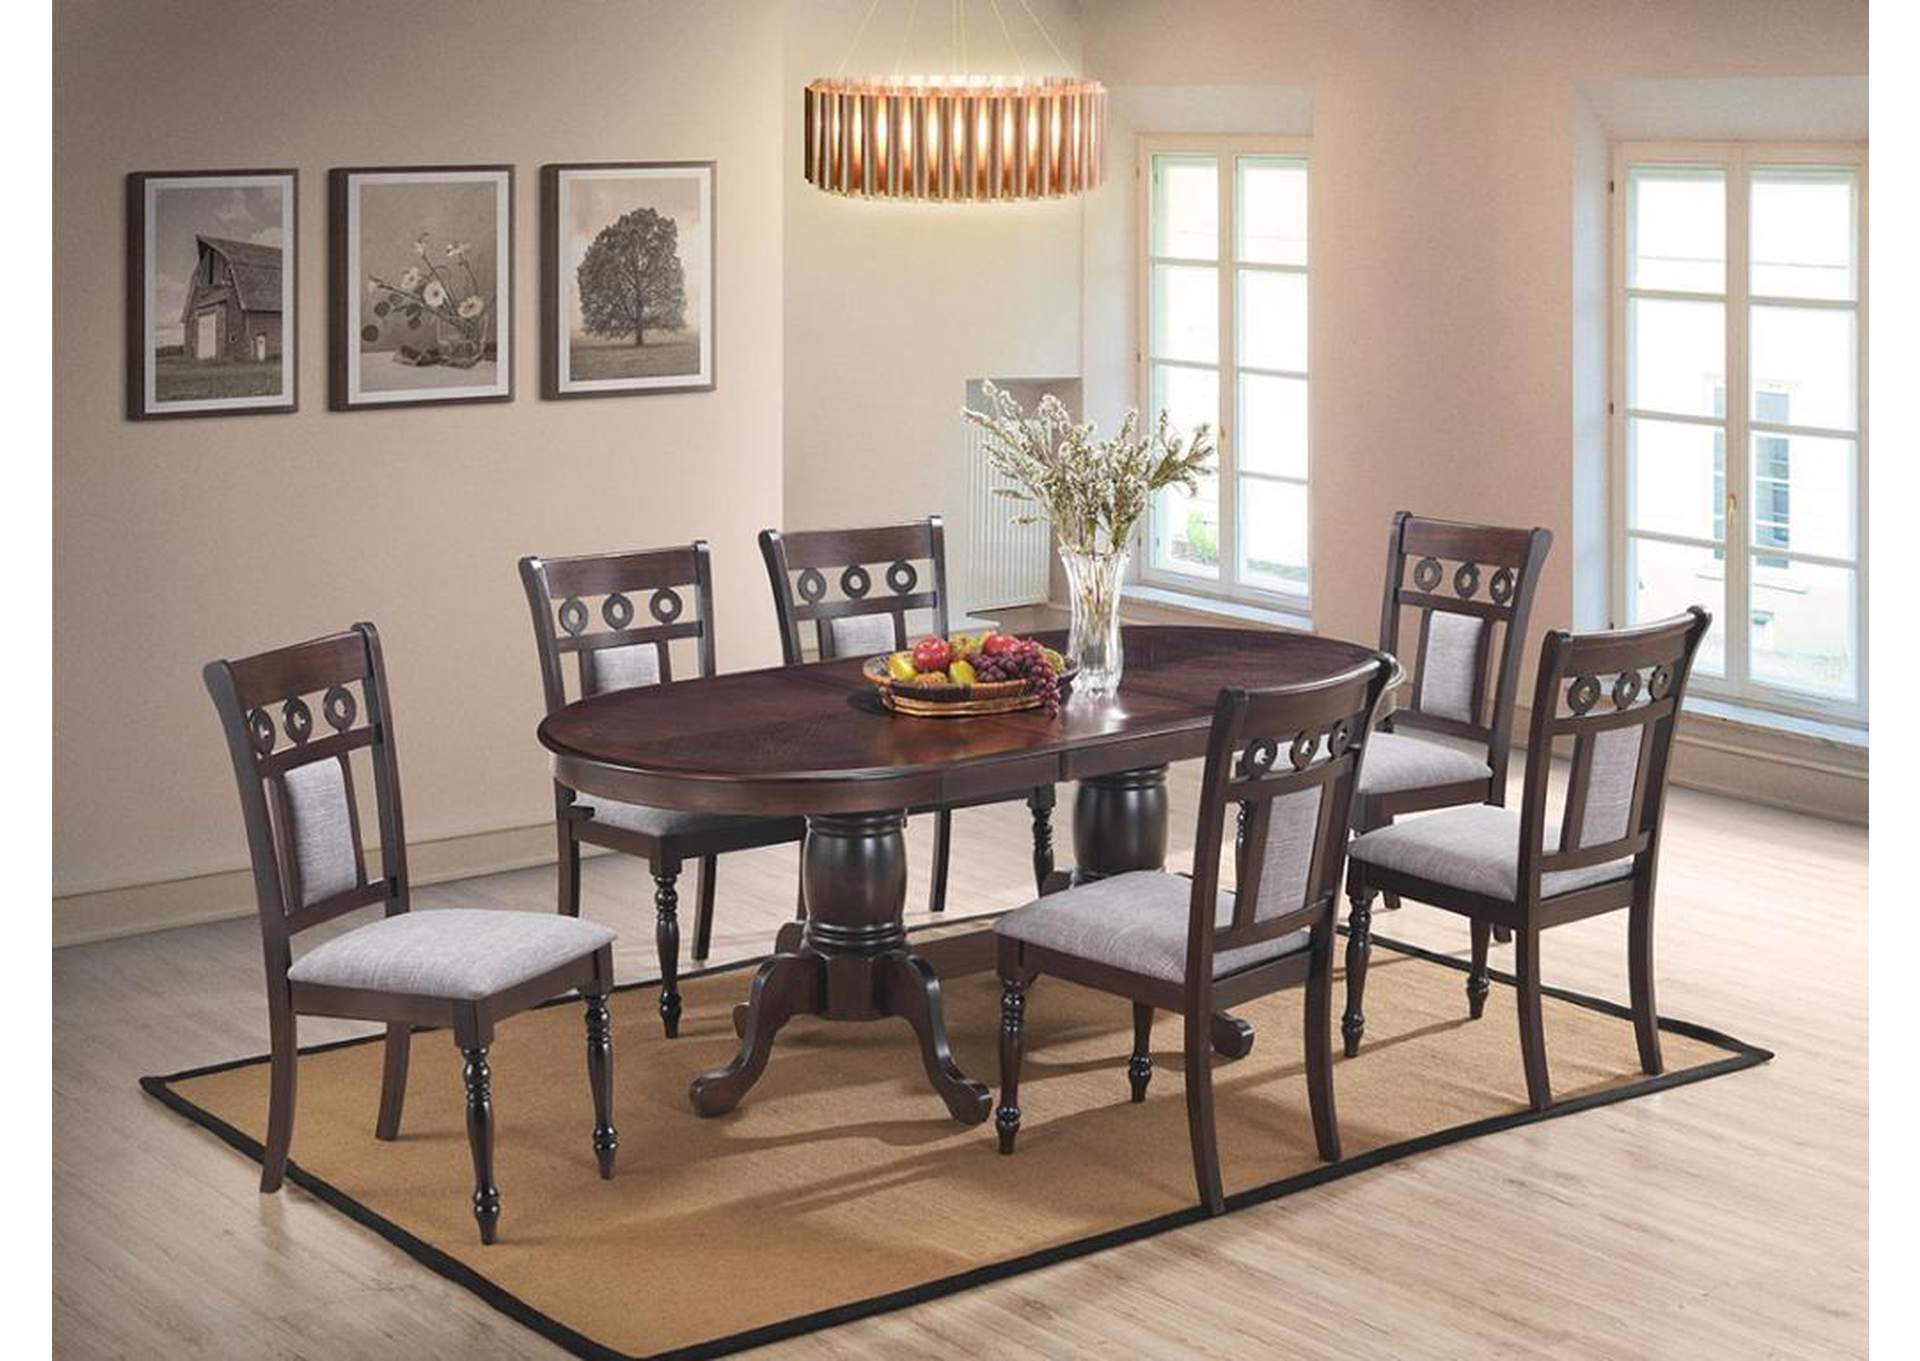 Lakewood Espresso 7 Piece Dining Set -Table W/ 6 Side Chairs,Cosmos Furniture